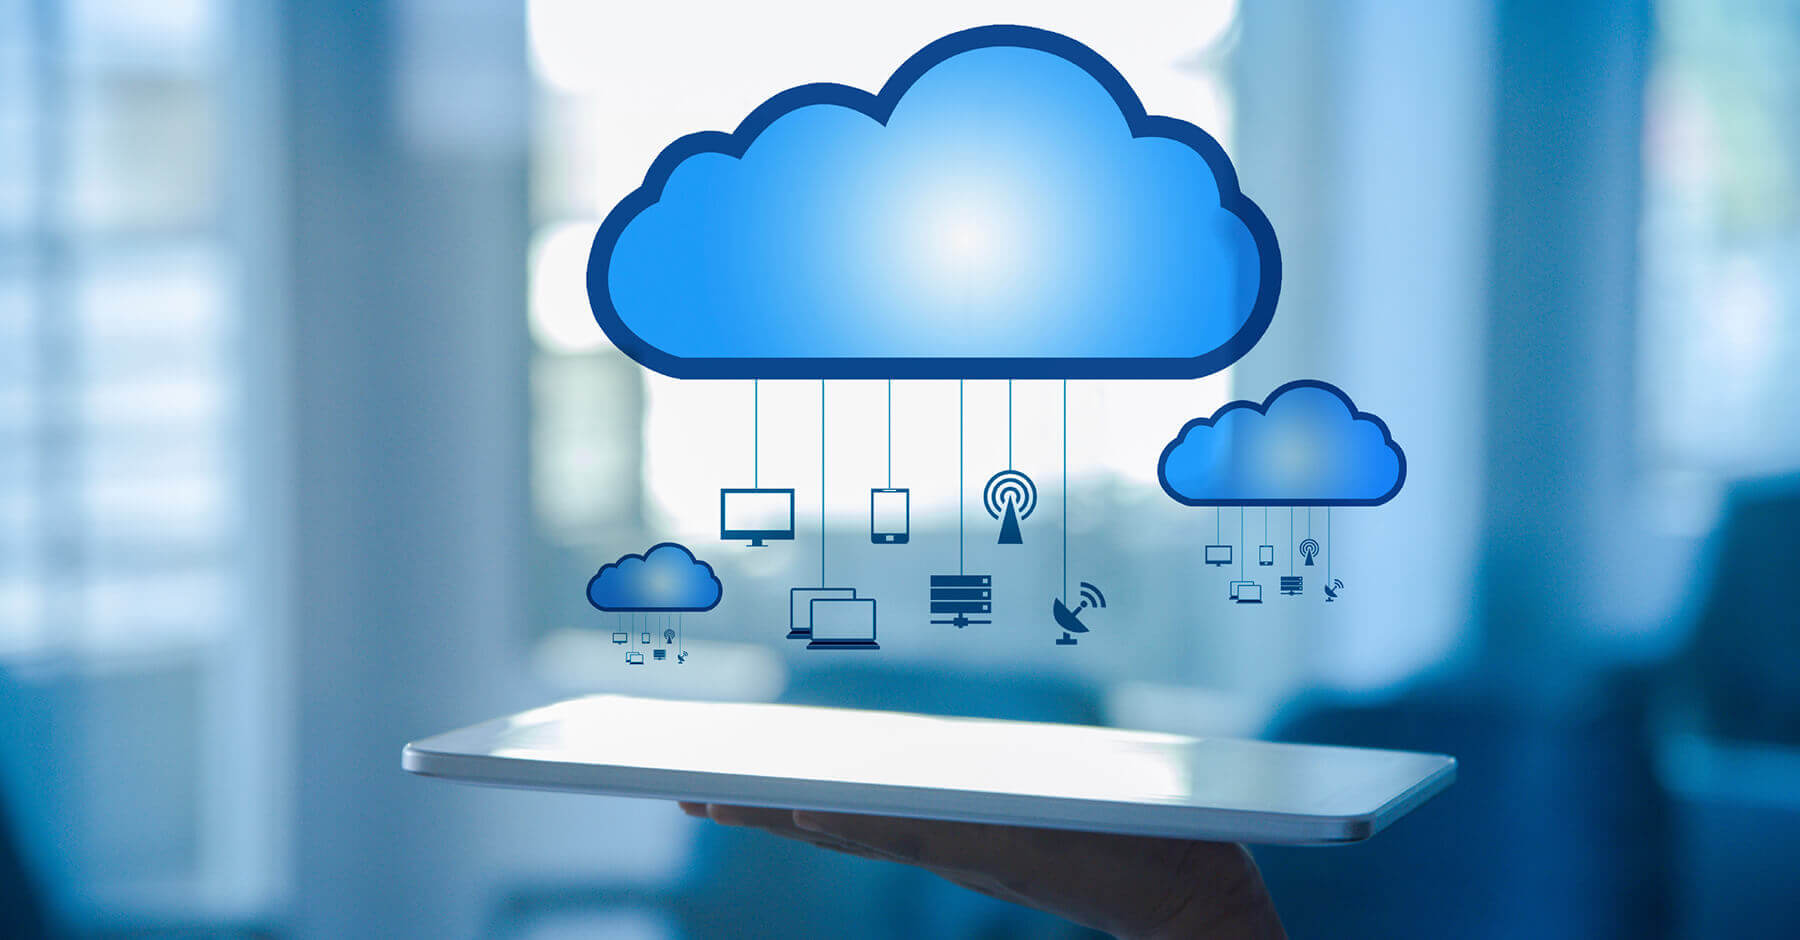  A cloud consultant advises, serves, and guides enterprises who wish to migrate their data to the cloud. They may arrange official training sessions to educate personnel on the new methodology for organisation, security, and storage.